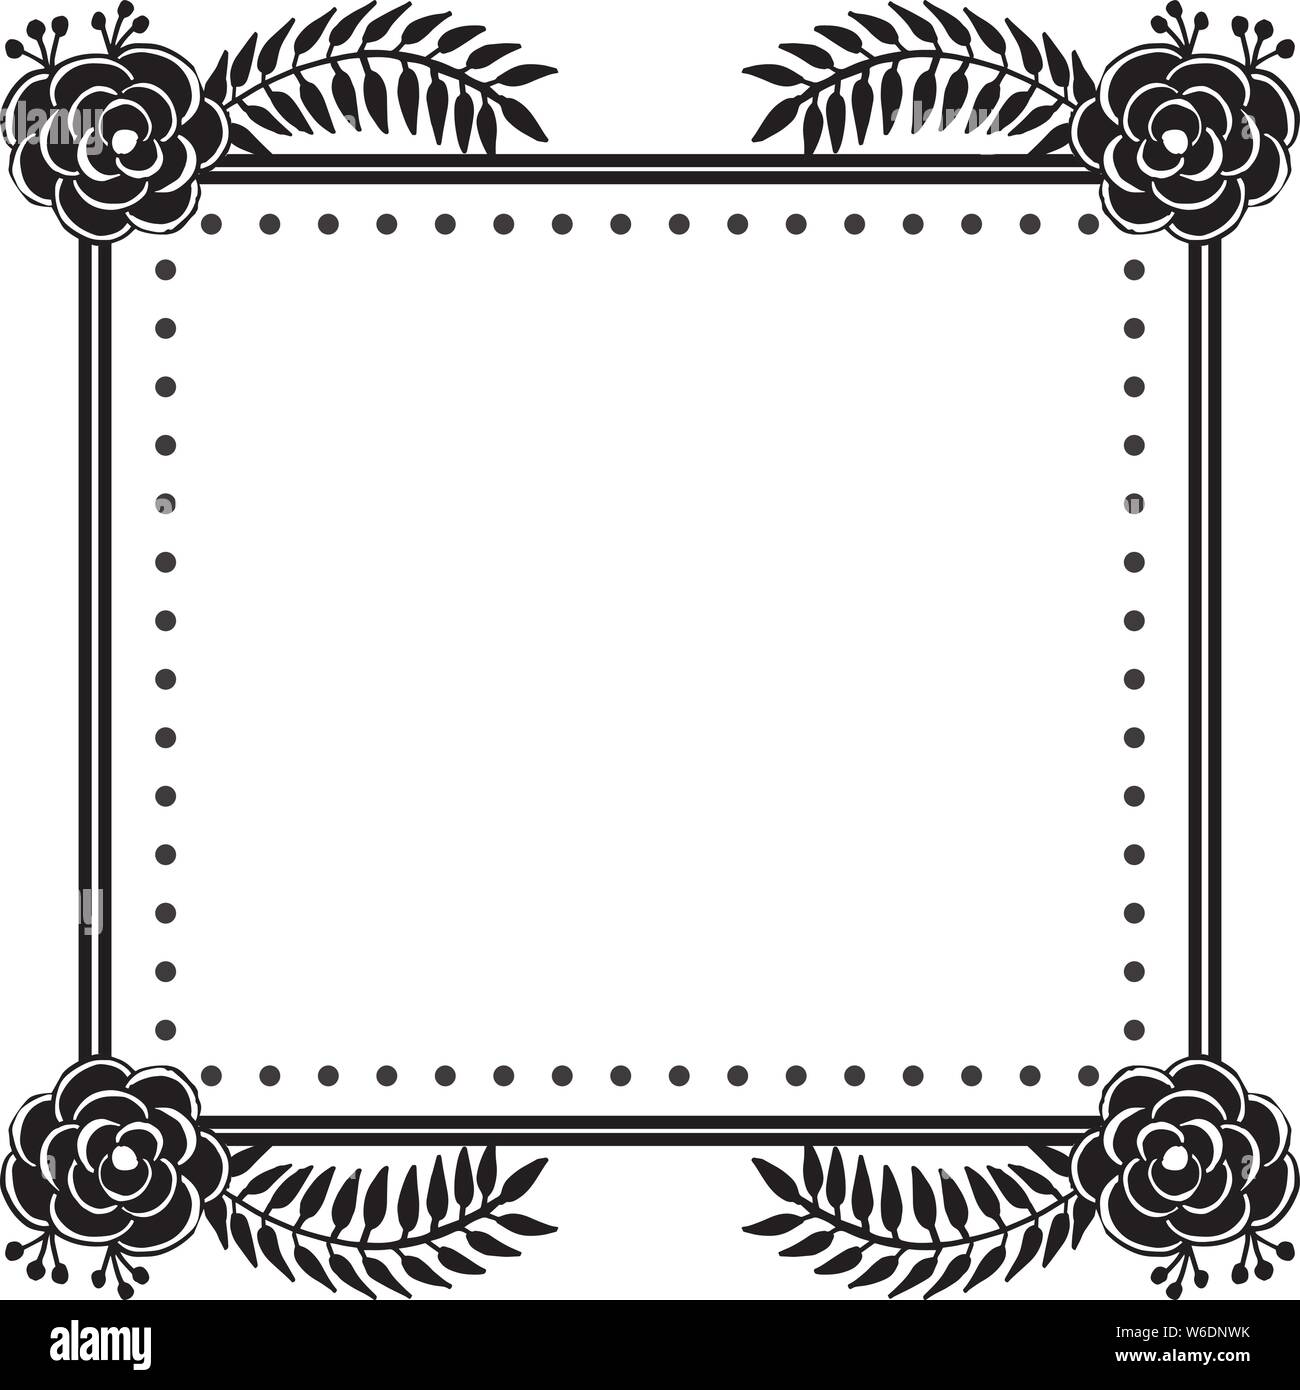 Decorative Frame Pattern Ornate With Cute Flowers Wallpaper Of Greeting Card Invitation Card Vector Illustration Stock Vector Image Art Alamy